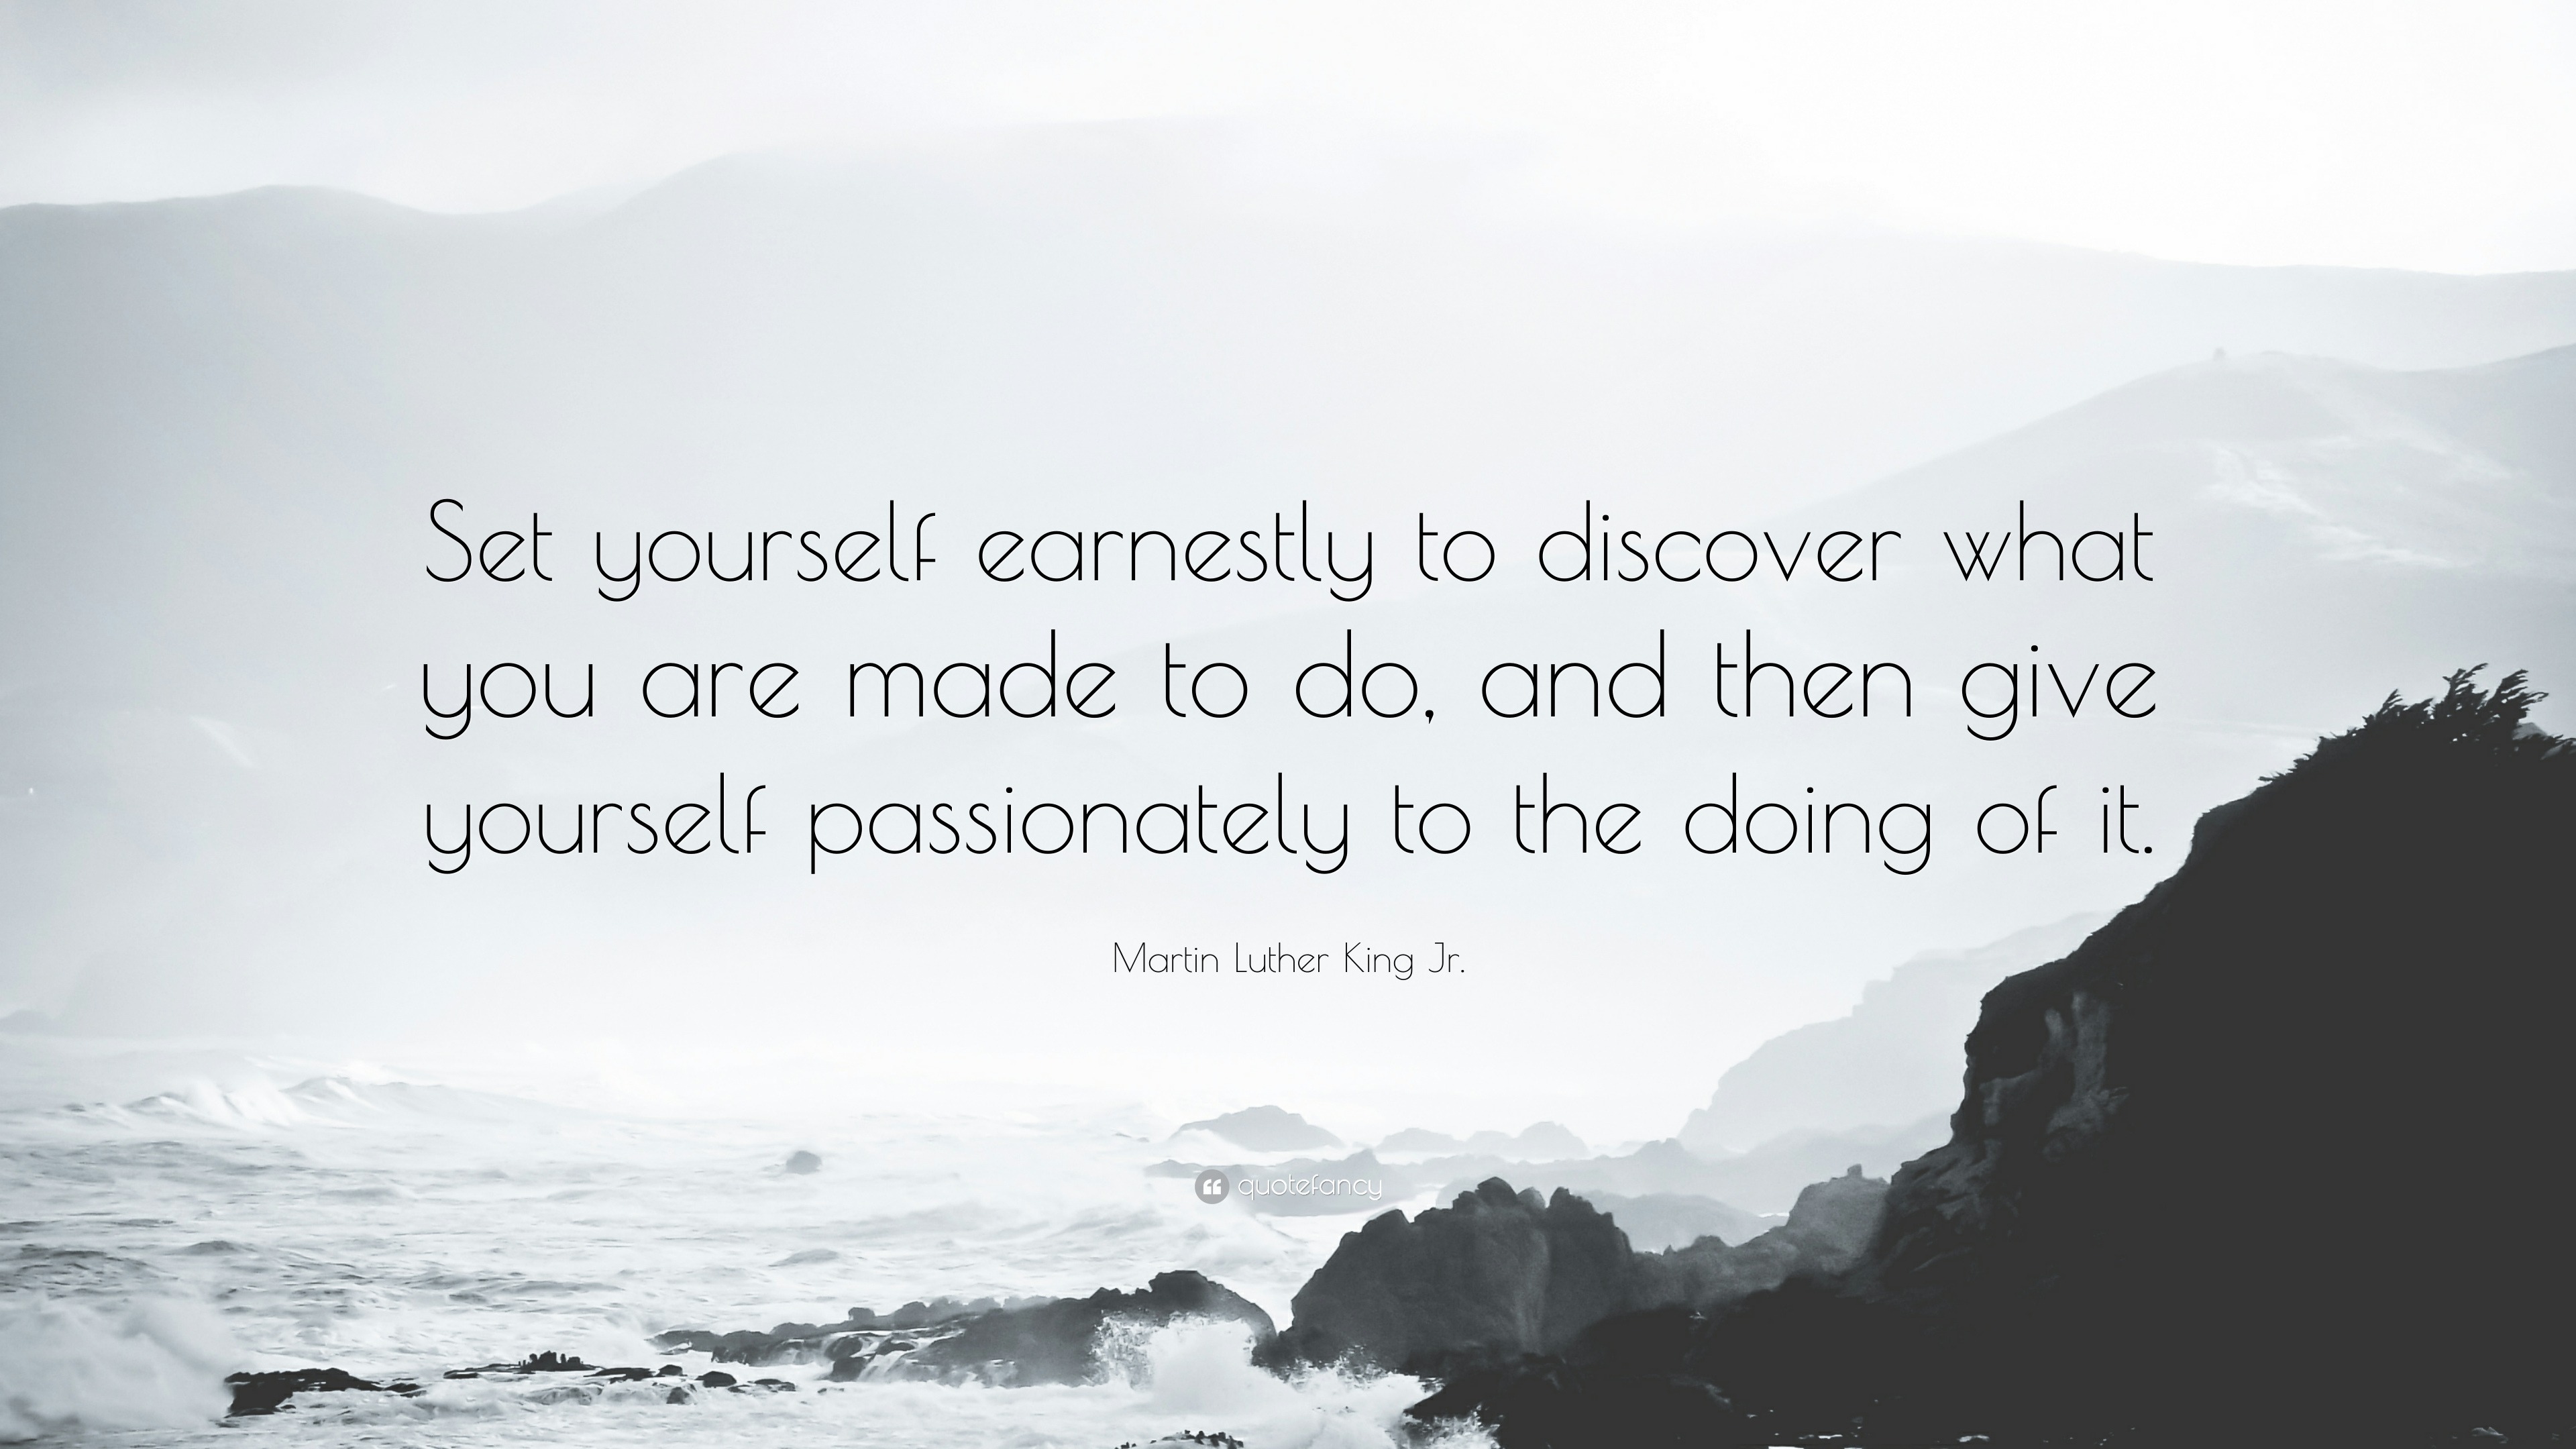 Martin Luther King Jr. Quote: “Set yourself earnestly to discover what ...